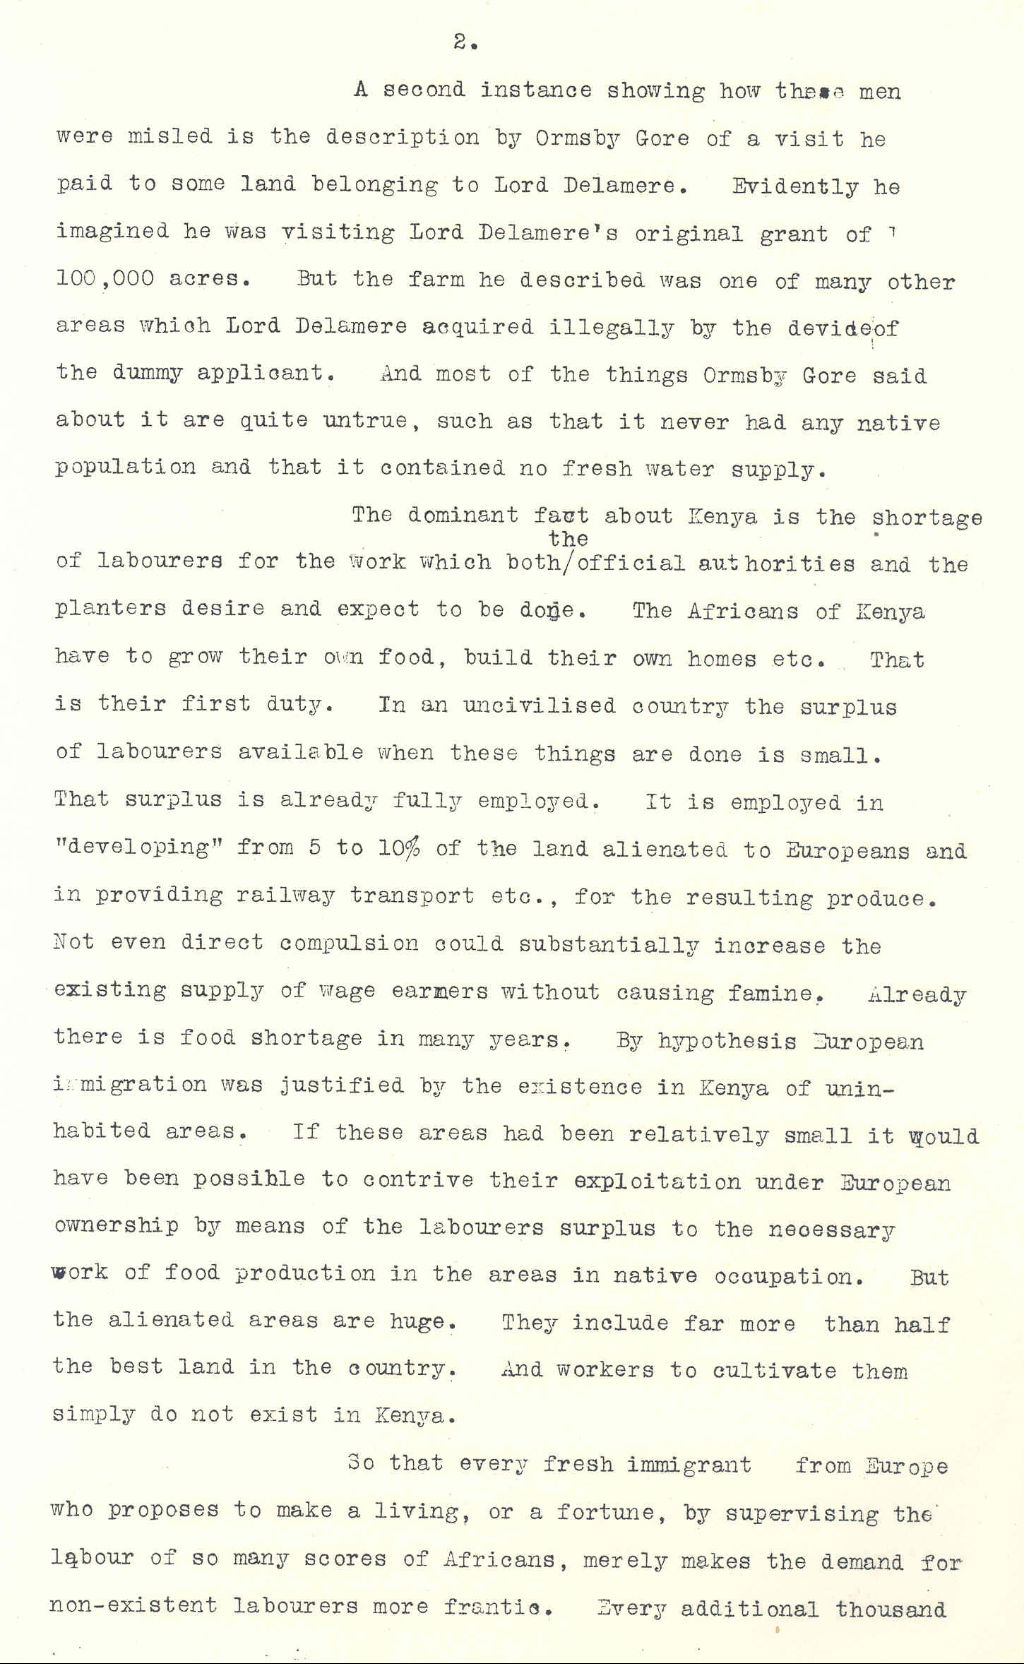 'Notes for speakers in the forth-coming debate on East African policy', 1925